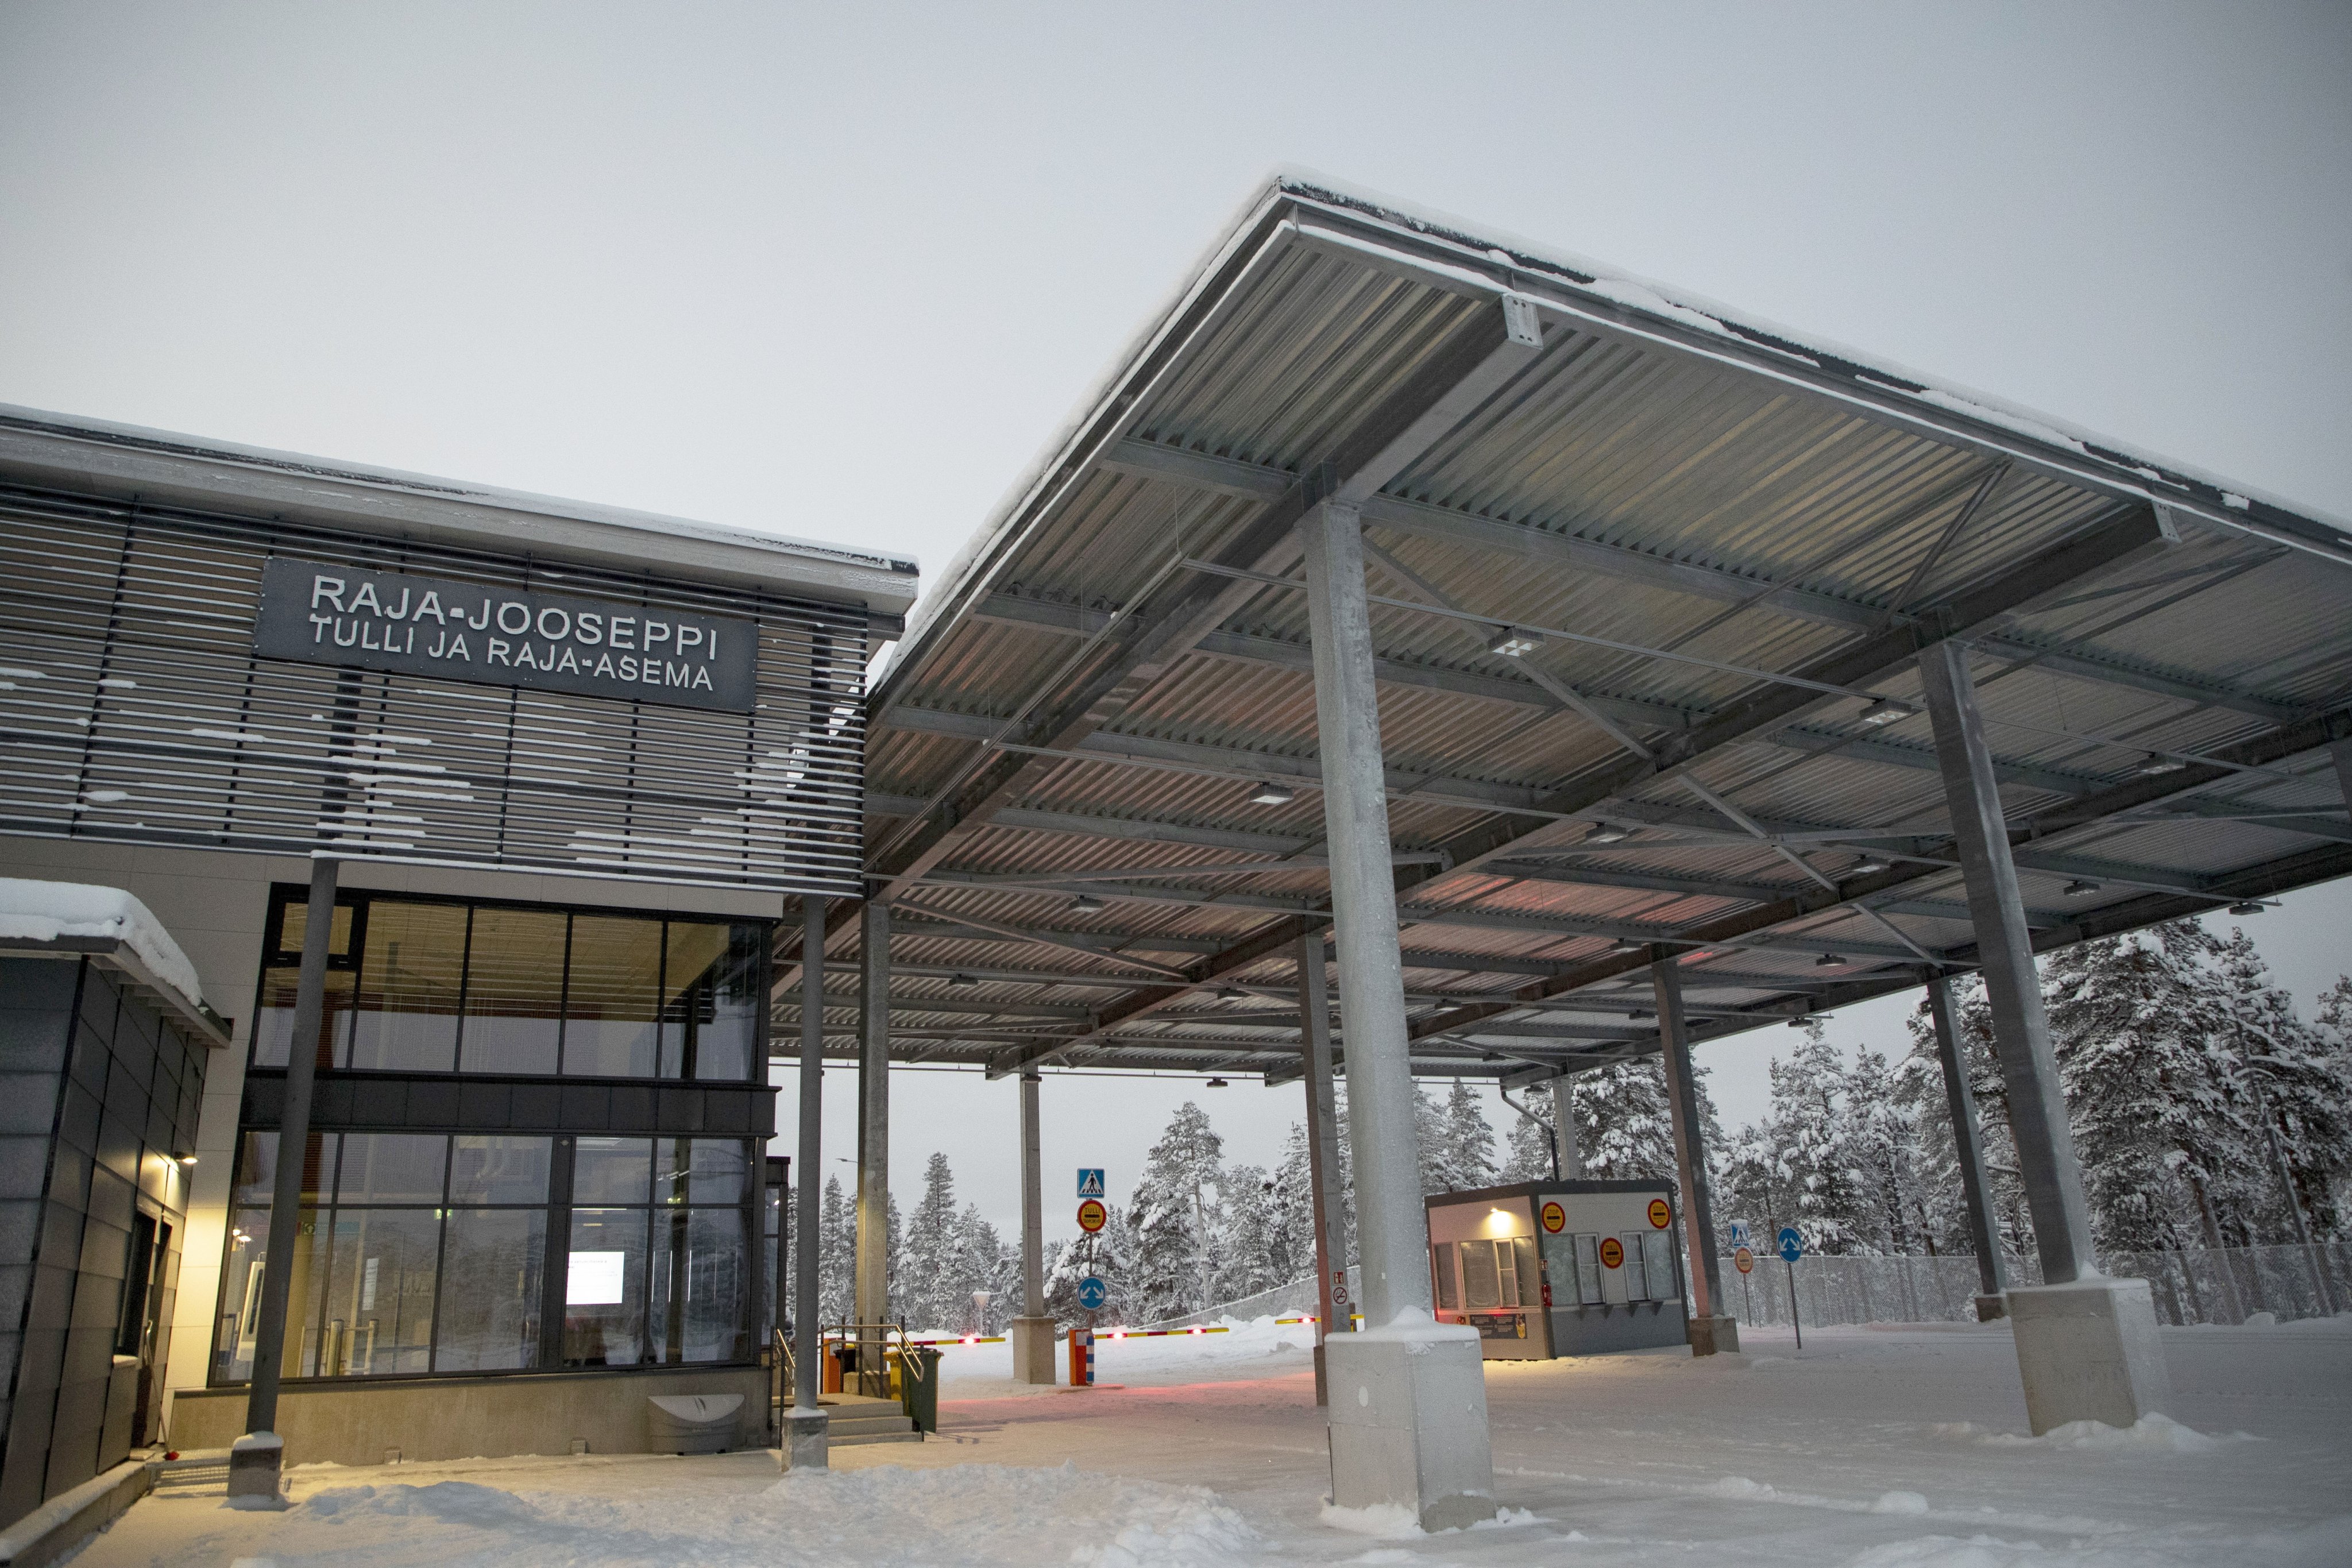 The Raja-Jooseppi border station in Lapland, northern Finland, is the only station on the border between Finland and Russia that is open to traffic on Tuesday. Photo: EPA-EFE